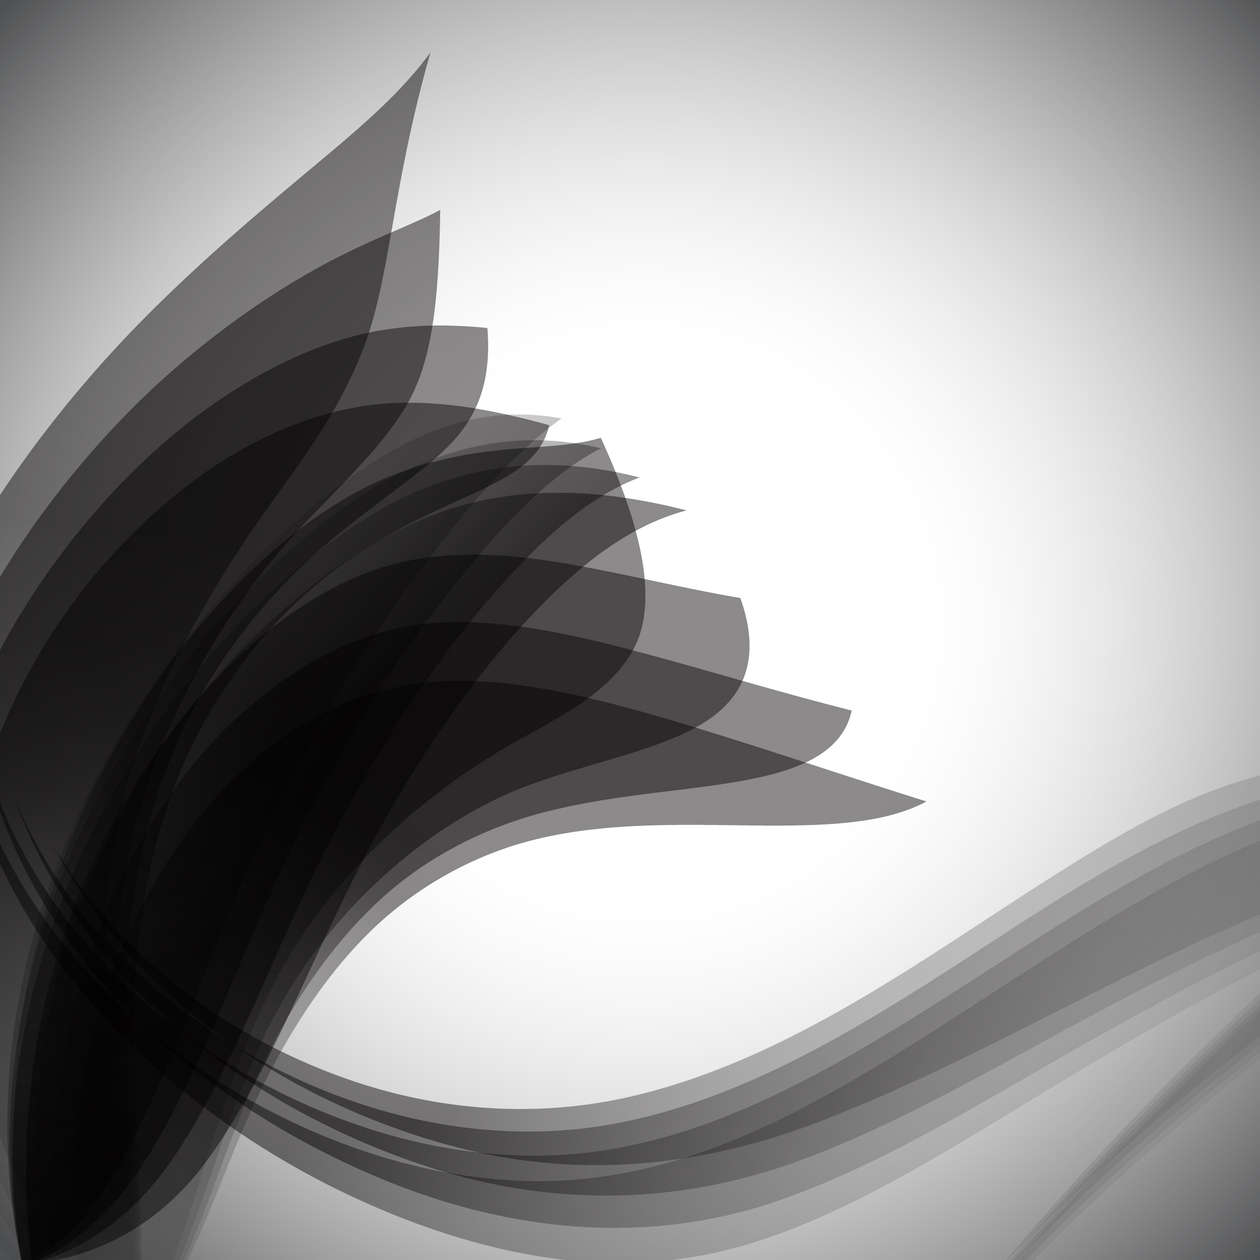 abstract gray wave stripe pattern background Photoshop brush